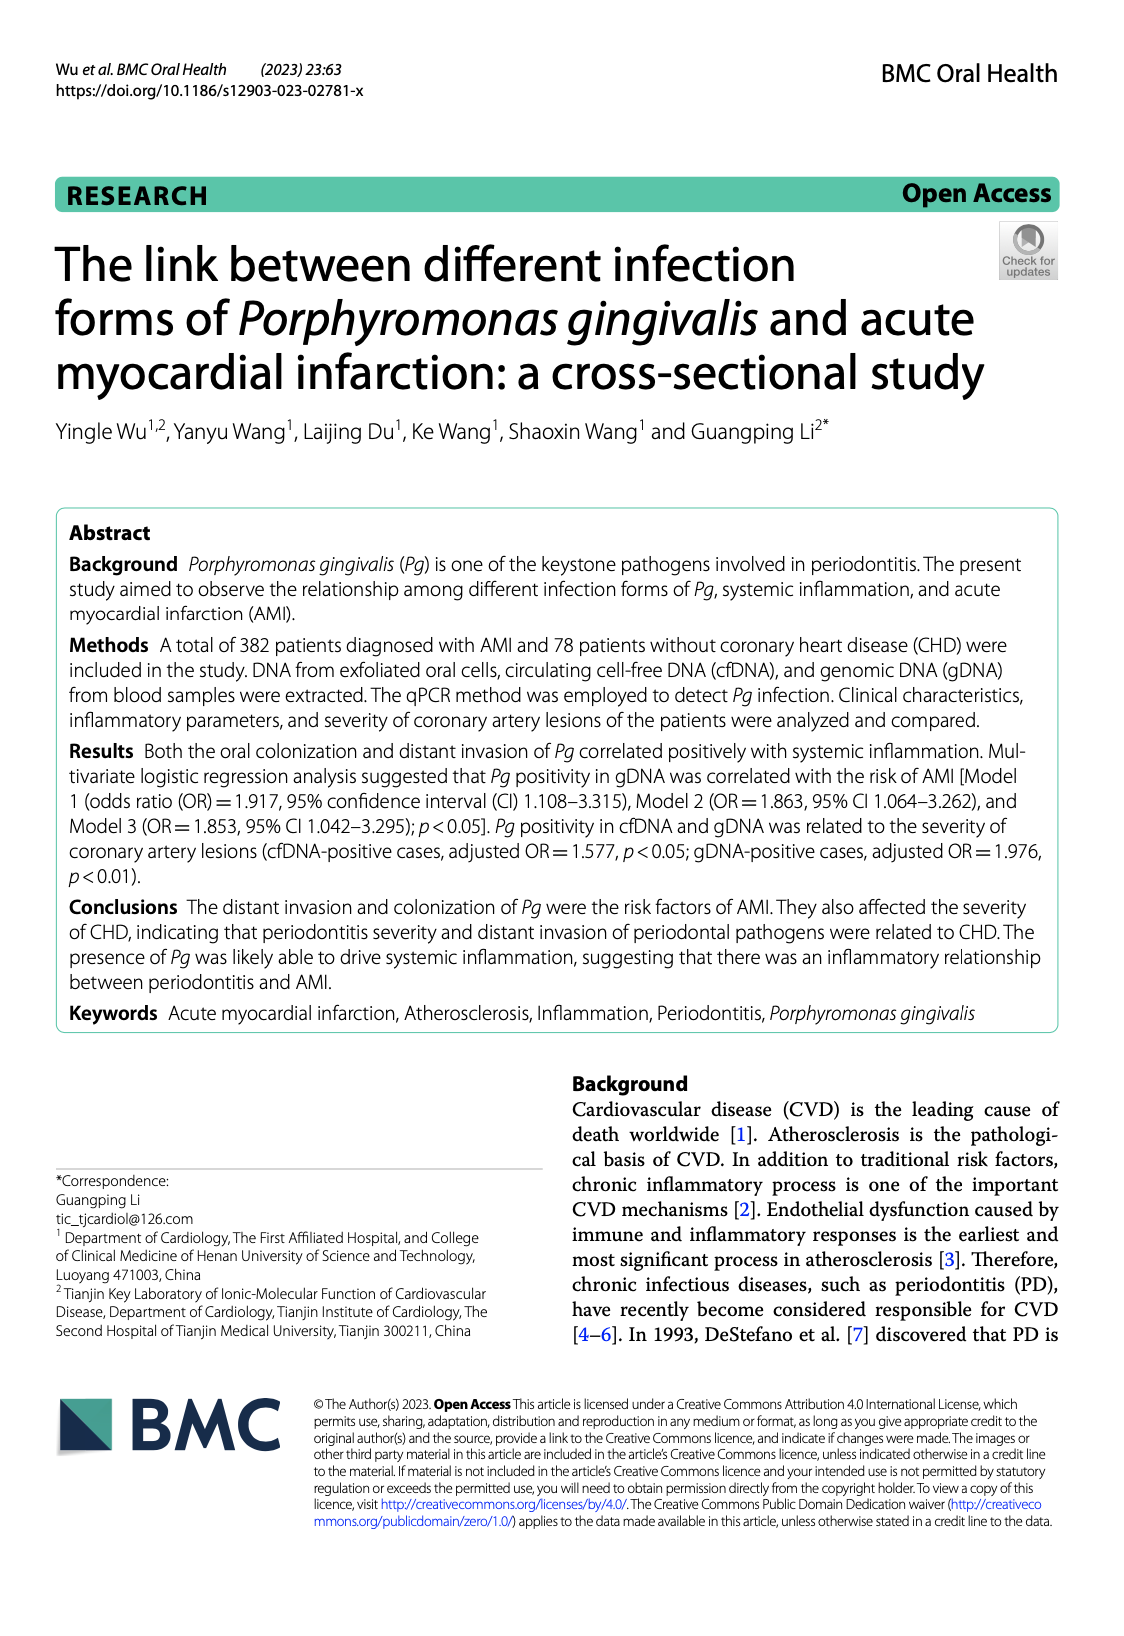 The link between different infection forms of Porphyromonas gingivalis and acute myocardial infarction: a cross-sectional study